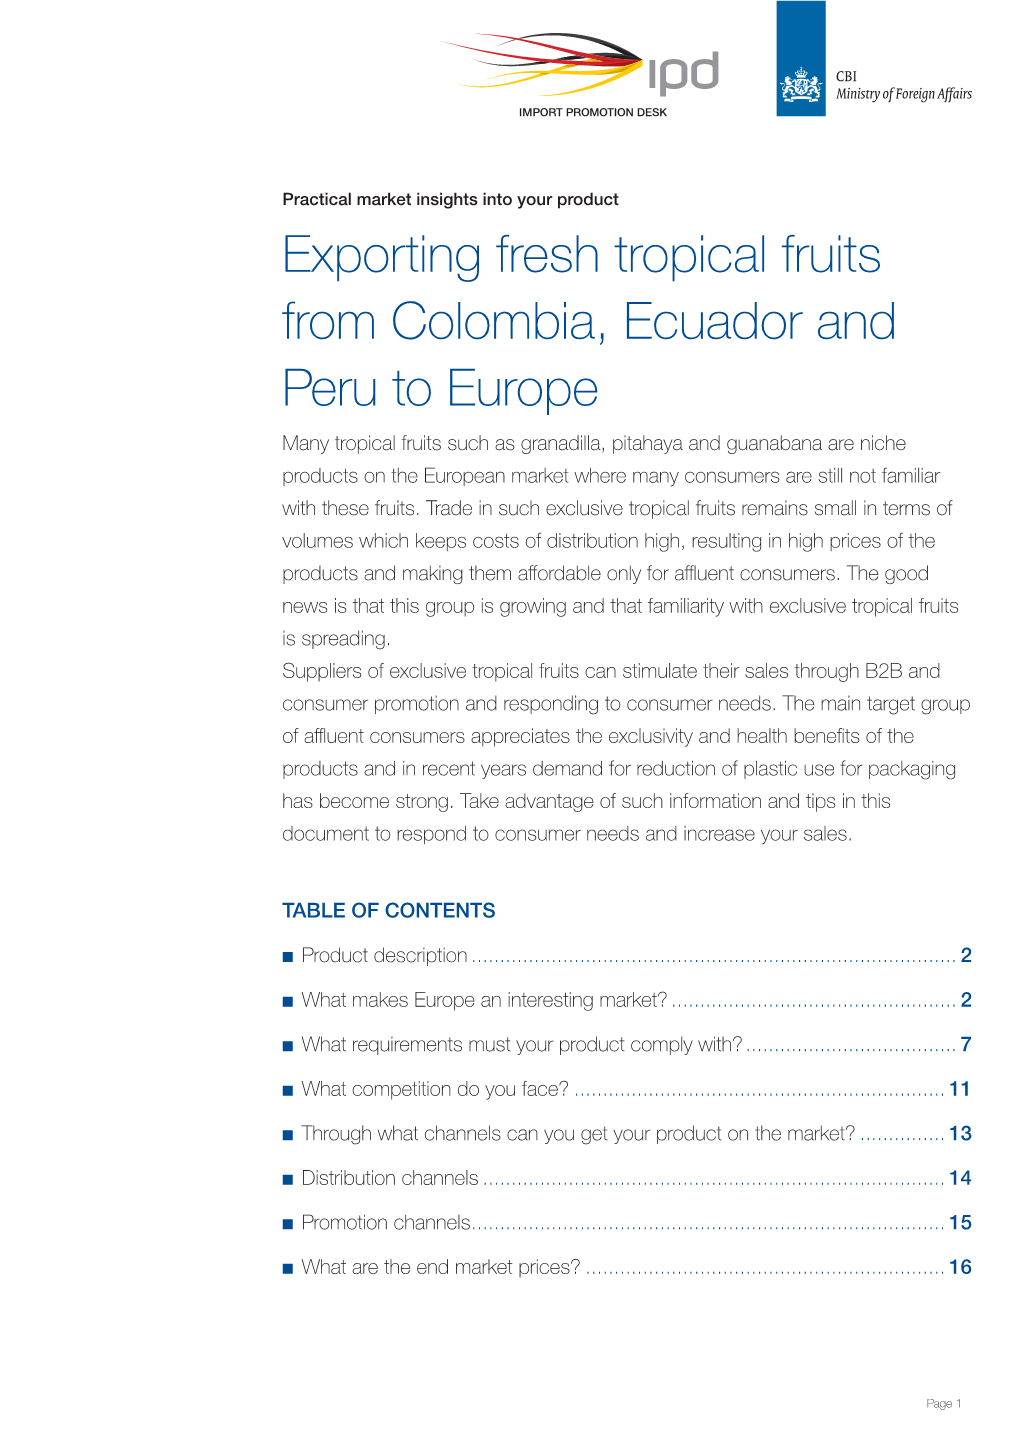 Exporting Fresh Tropical Fruits from Colombia, Ecuador and Peru To